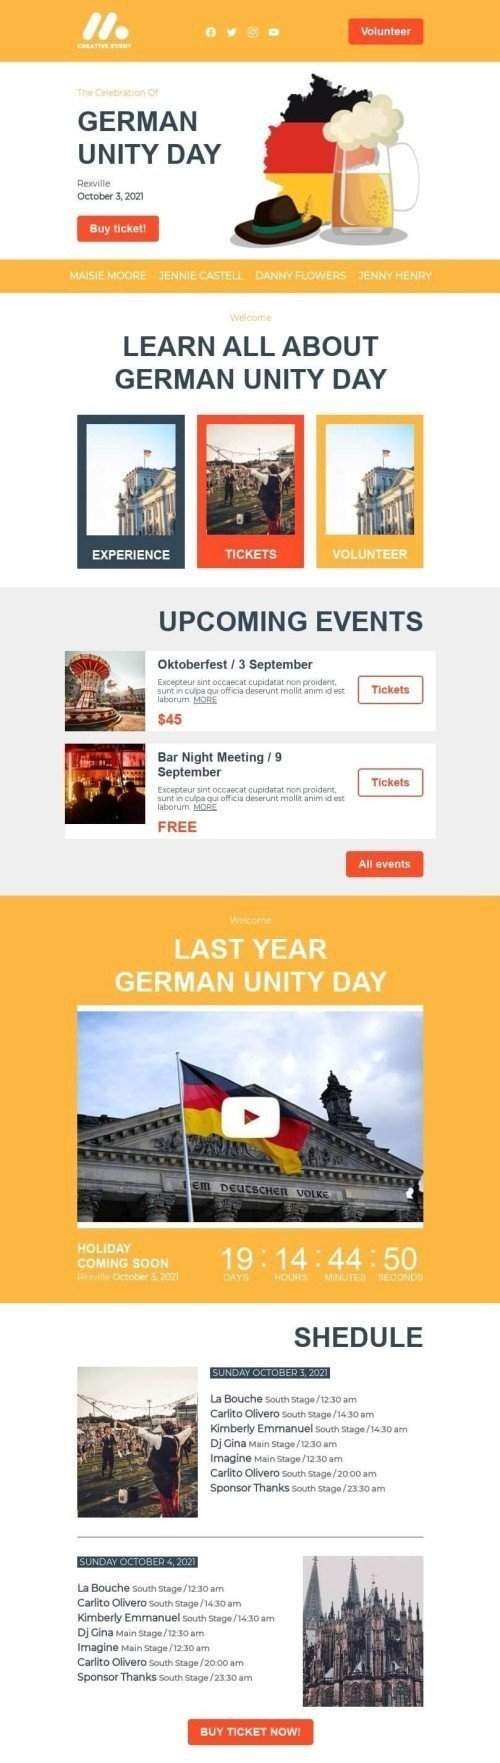 German Unity Day Email Template "Creative event" for Hobbies industry mobile view